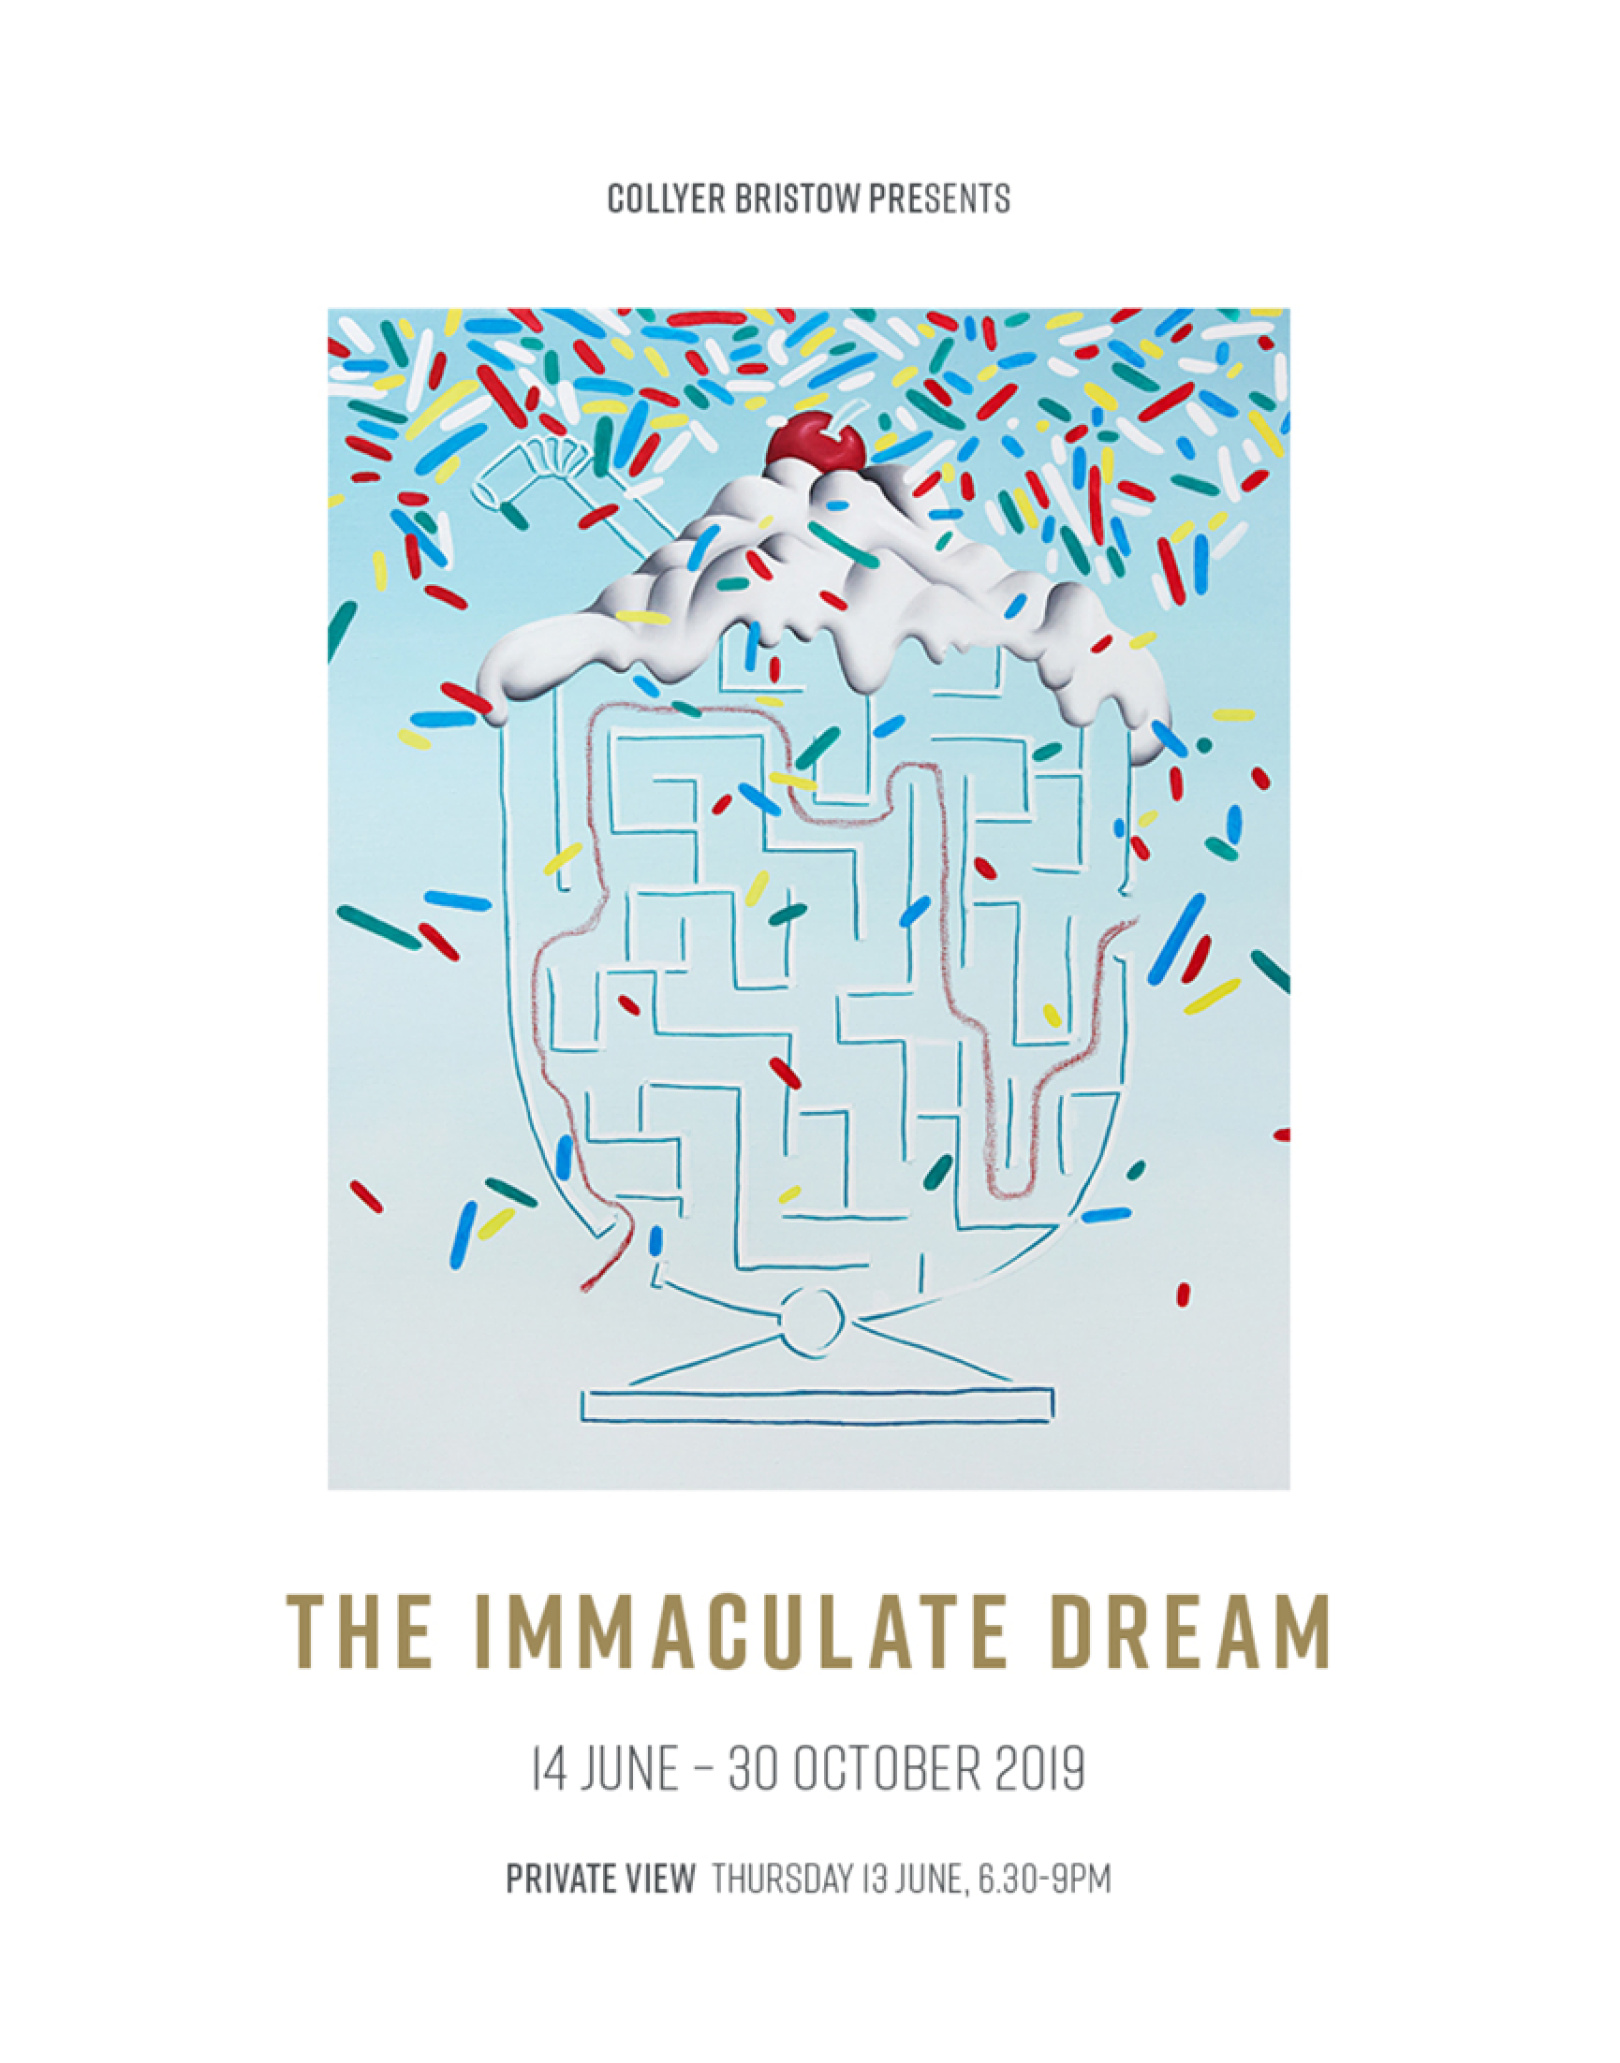 The Immaculate Dream - Collyer Bristow